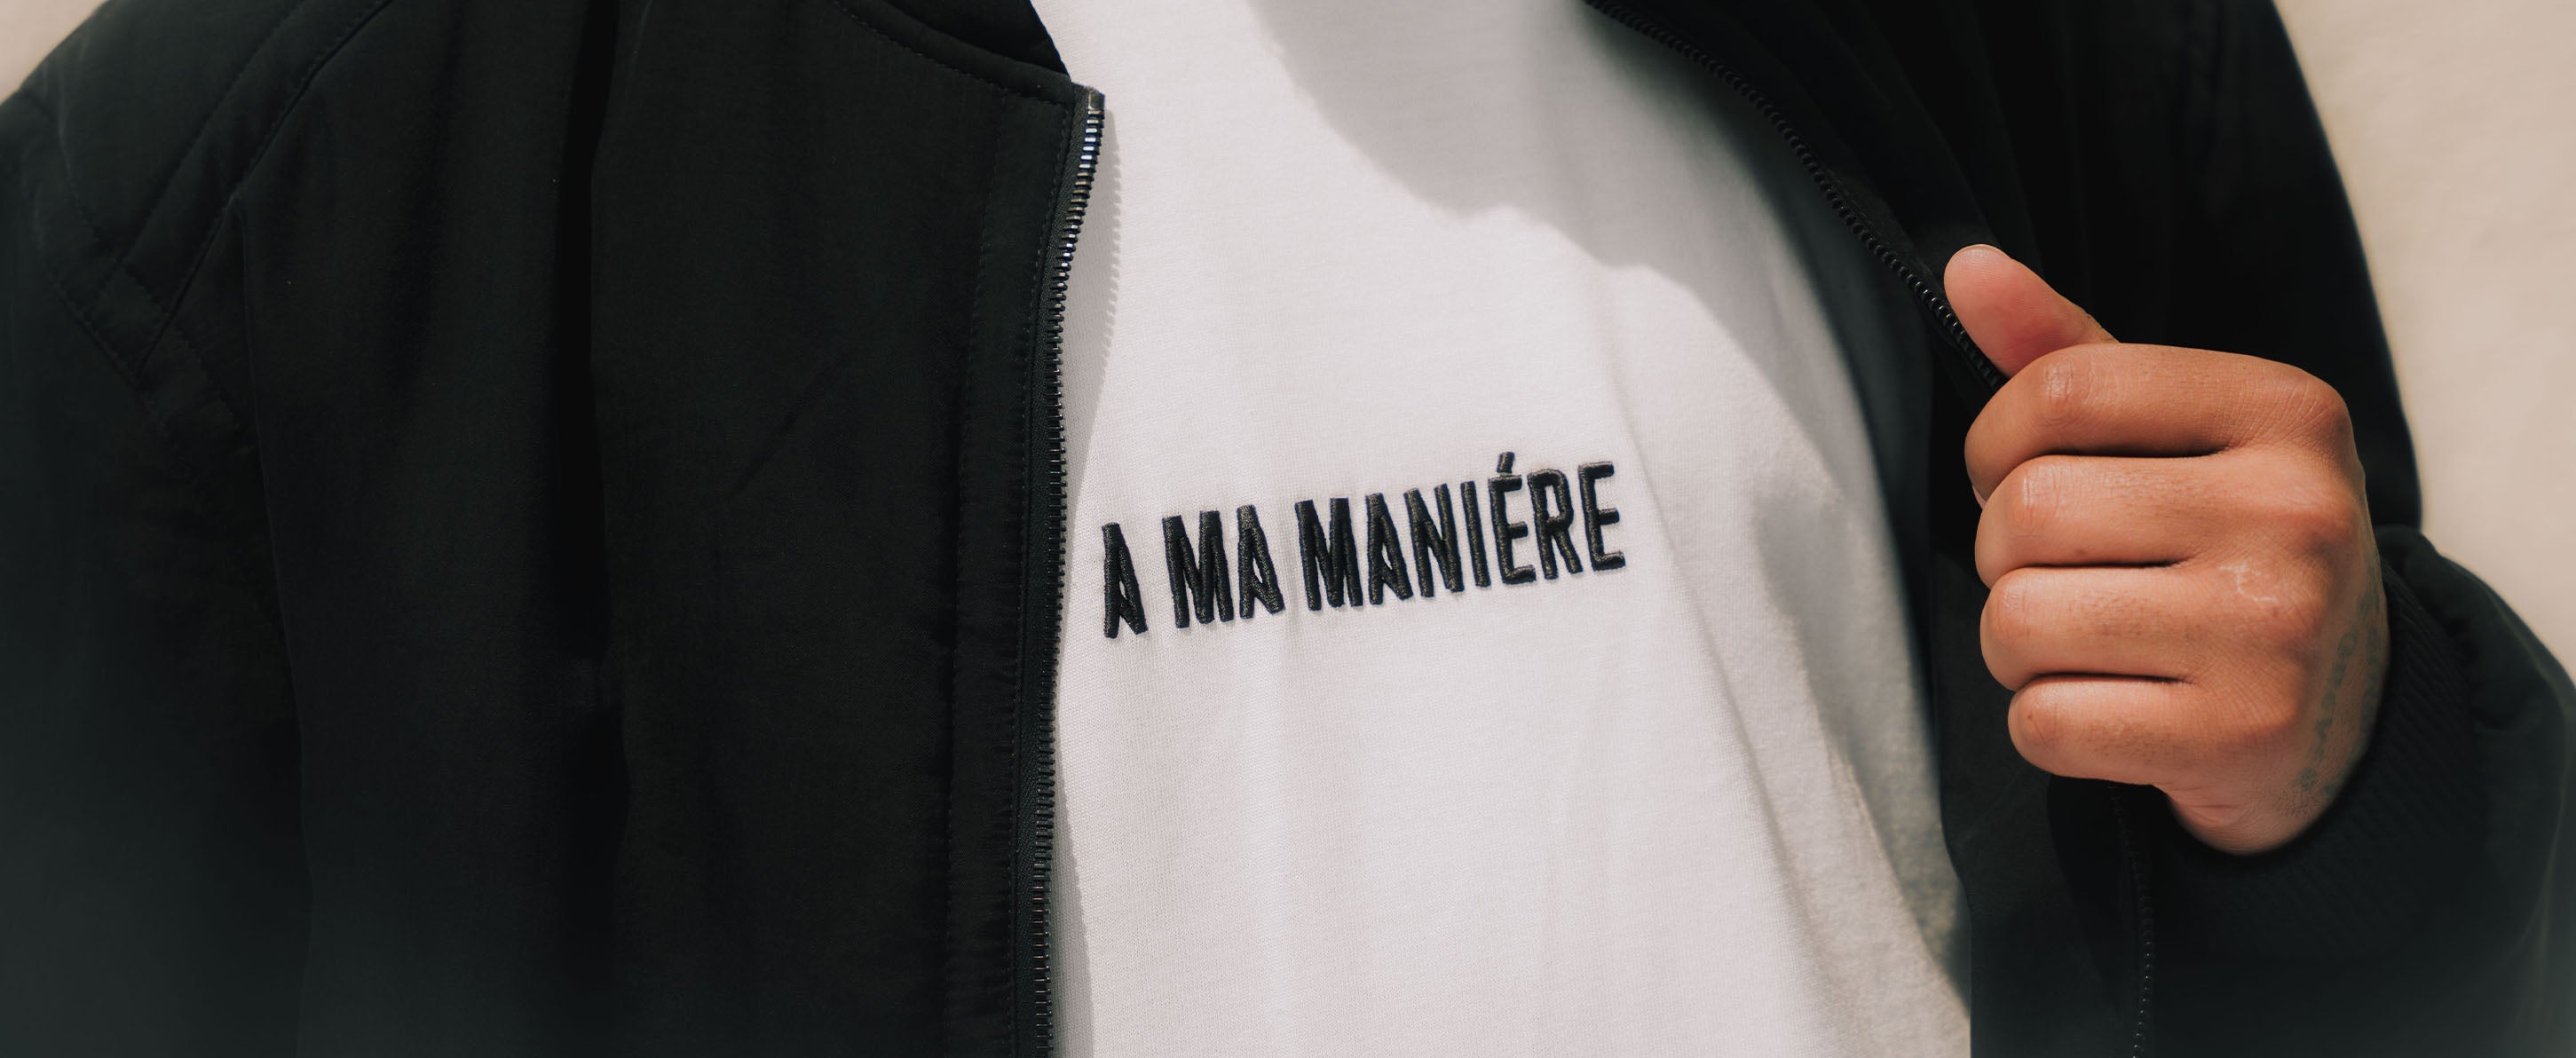 The A Ma Maniére Apparel Collection in 